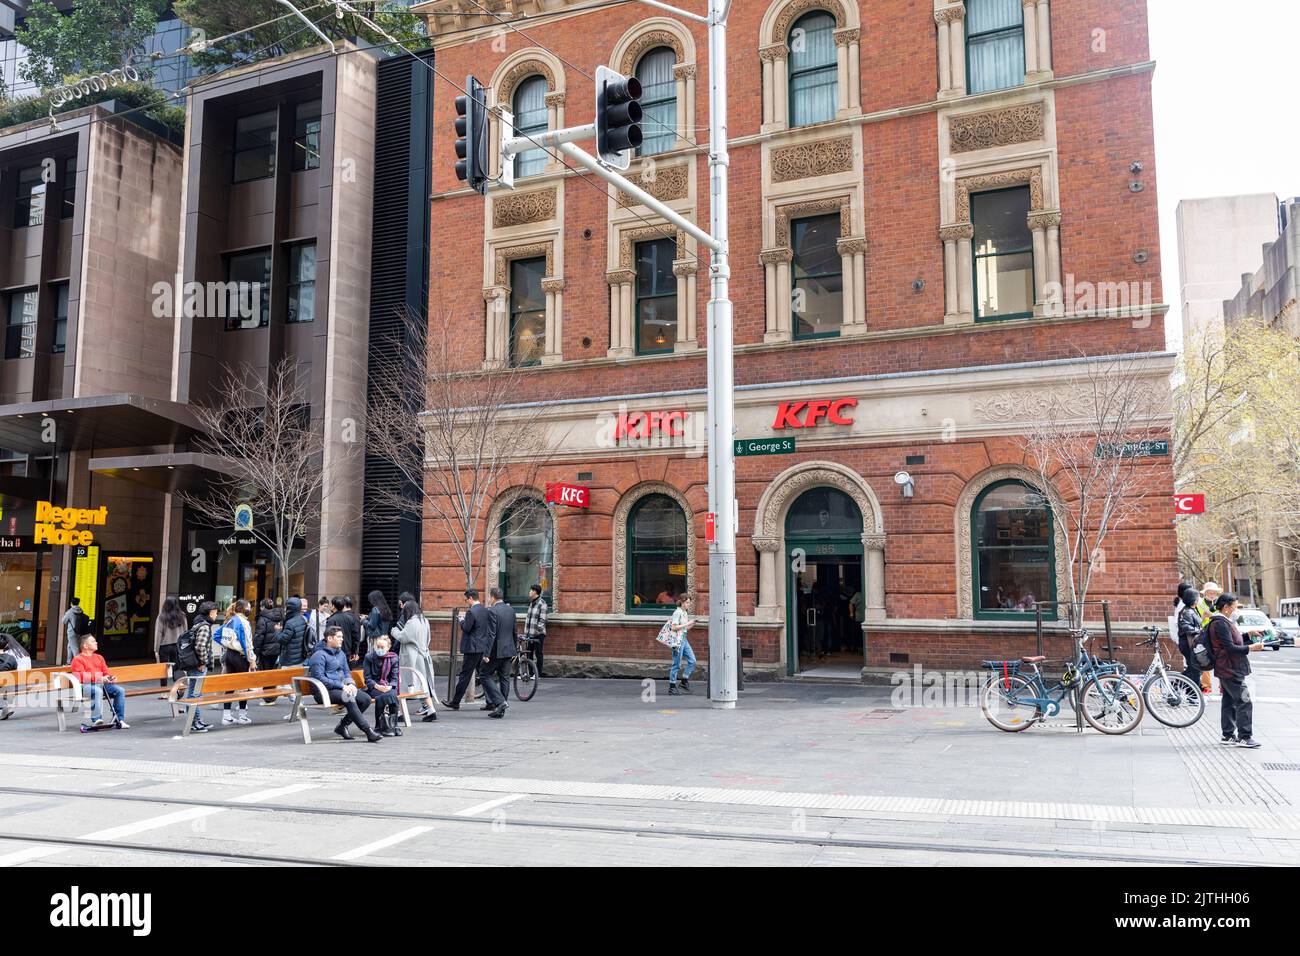 23rd December 2018, Sydney NSW Australia : Street View At The Crossing Of  George And Bathurst Street With KFC In Old Bricks Building And People In Sydney  NSW Australia Stock Photo, Picture